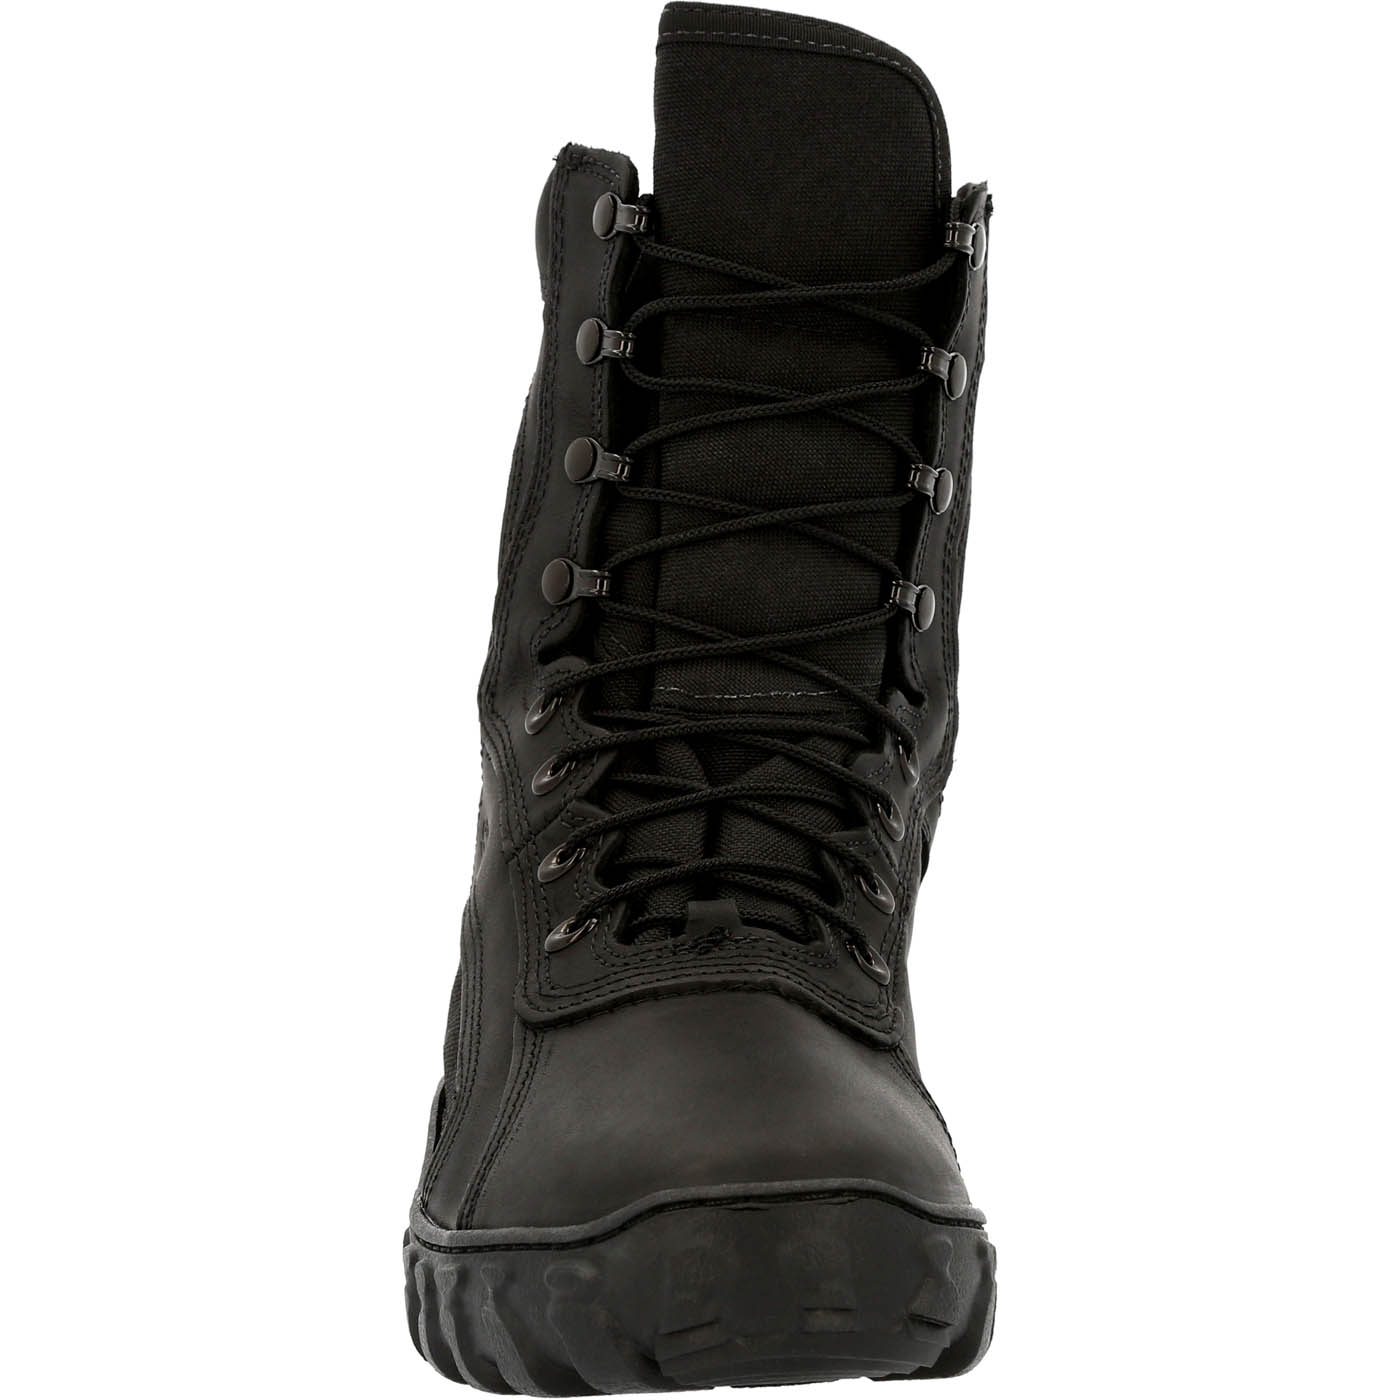 Rocky S2V: Black Waterproof Insulated Military Boot; RKC079